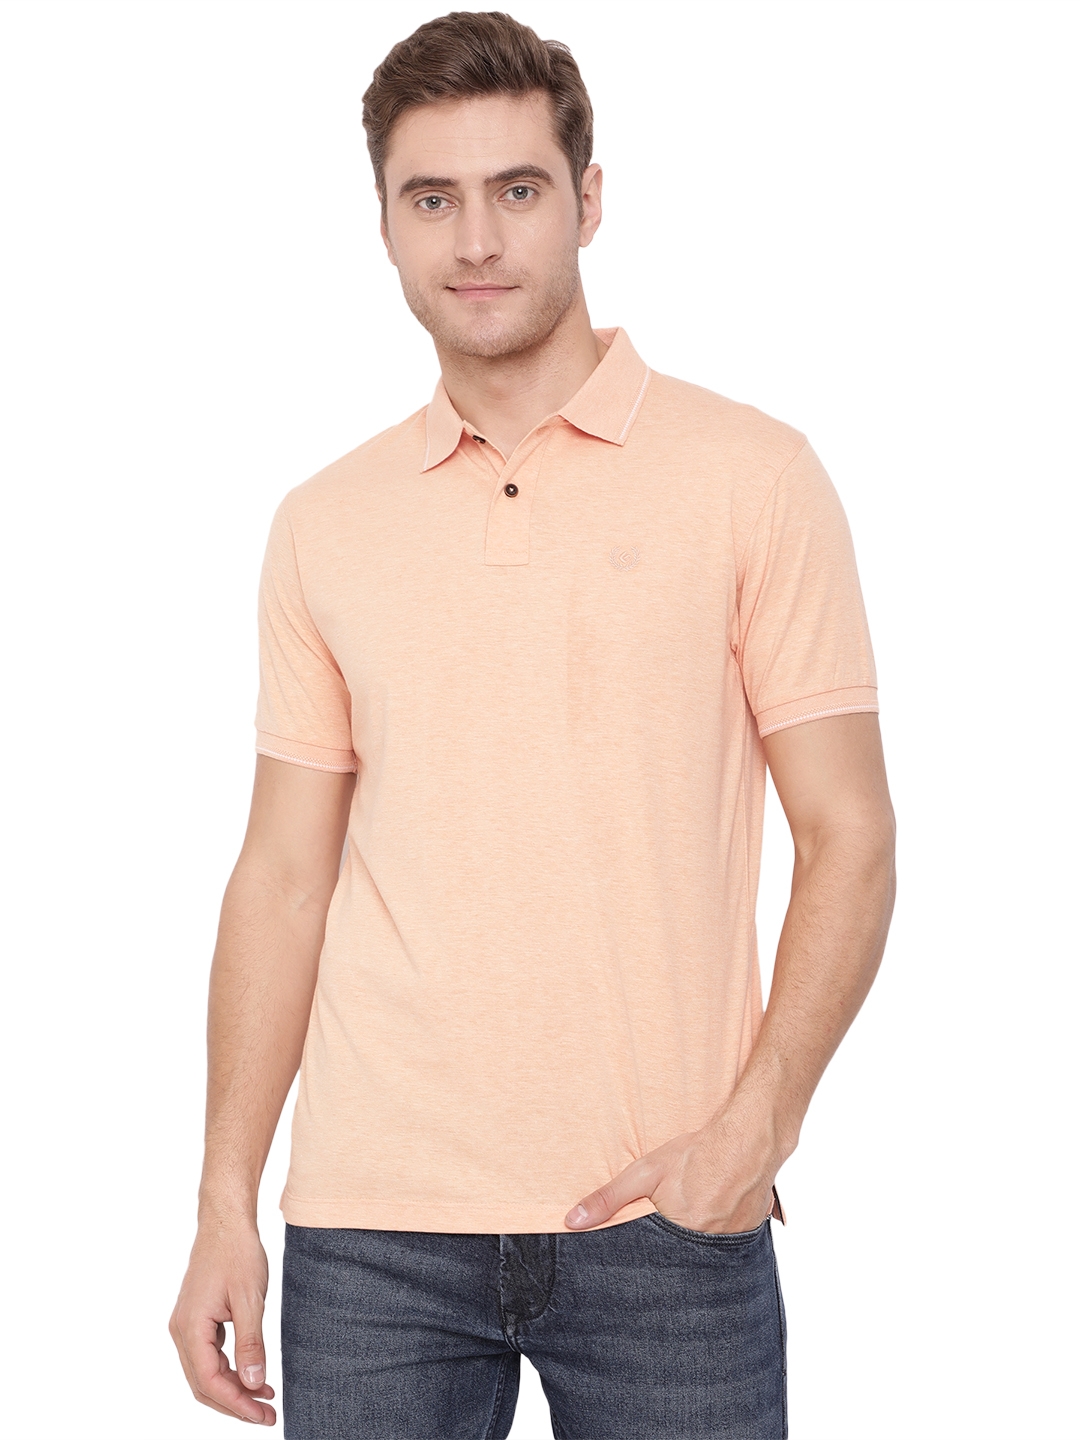 Greenfibre | Blossom Pink Solid Slim Fit Polo T-Shirt | Greenfibre